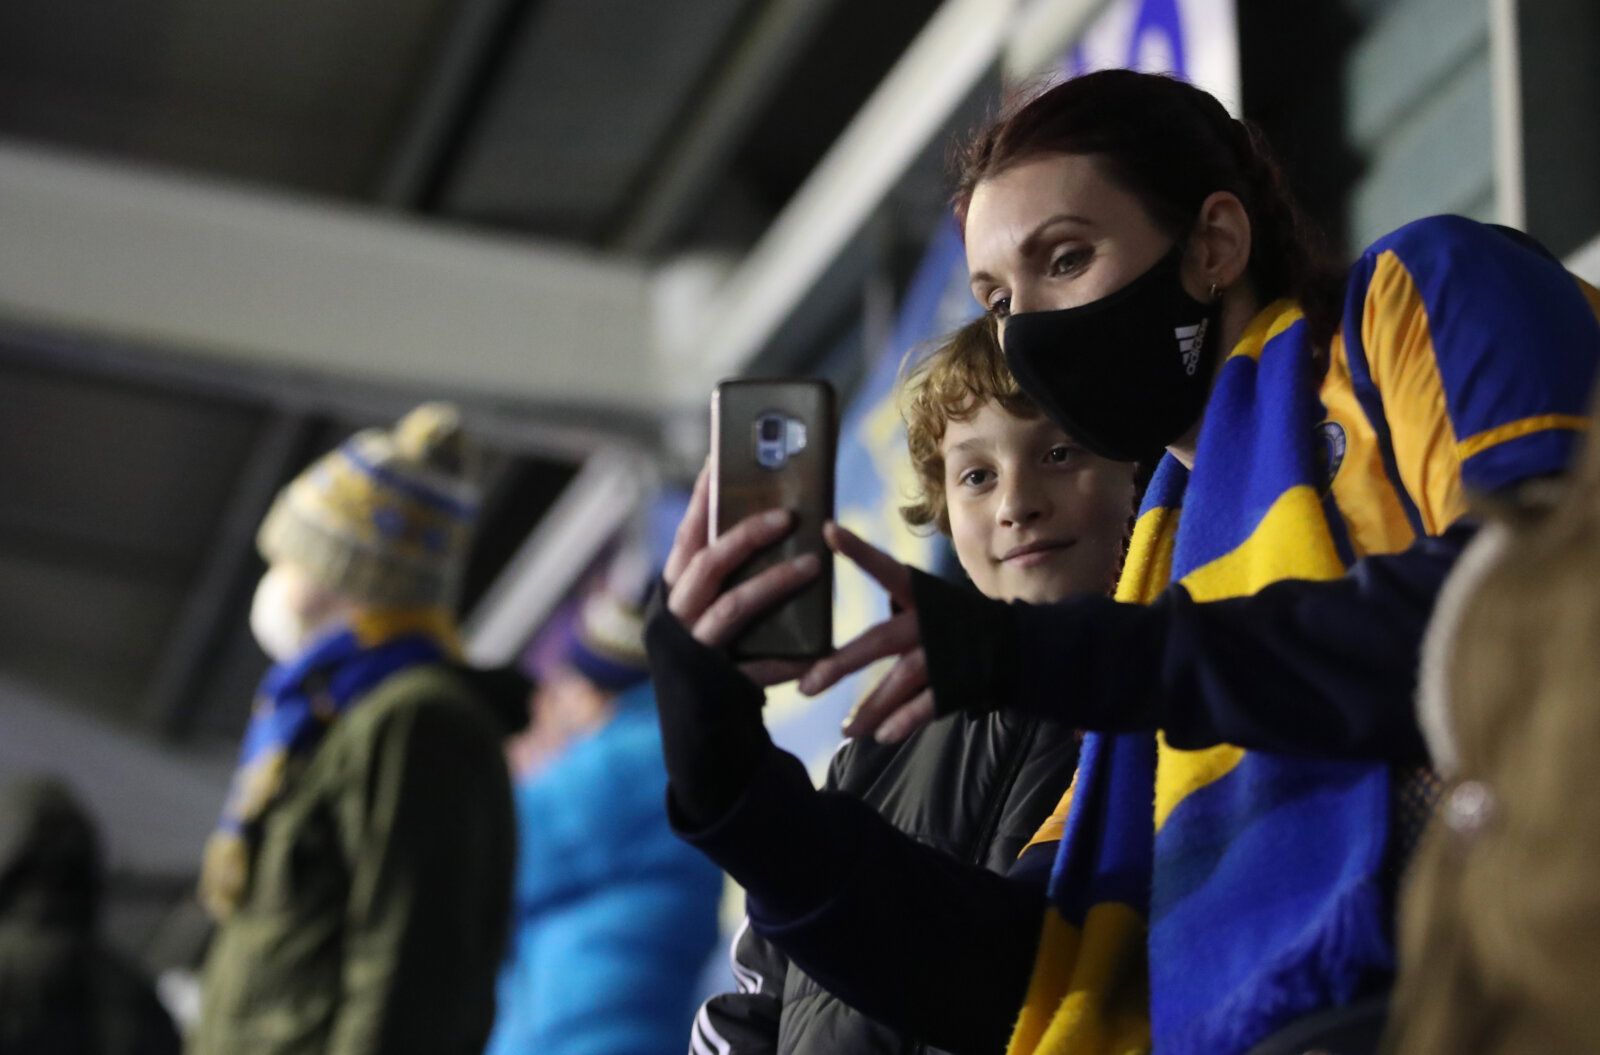 Soccer Football - League One - Shrewsbury Town v Accrington Stanley - New Meadow, Shrewsbury, Britain - December 2, 2020 Fans in the stands pose for a picture, as a limited number of fans are allowed to attend stadiums following the outbreak of the coronavirus disease (COVID-19) Action Images via Reuters/Carl Recine EDITORIAL USE ONLY. No use with unauthorized audio, video, data, fixture lists, club/league logos or 'live' services. Online in-match use limited to 75 images, no video emulation. No